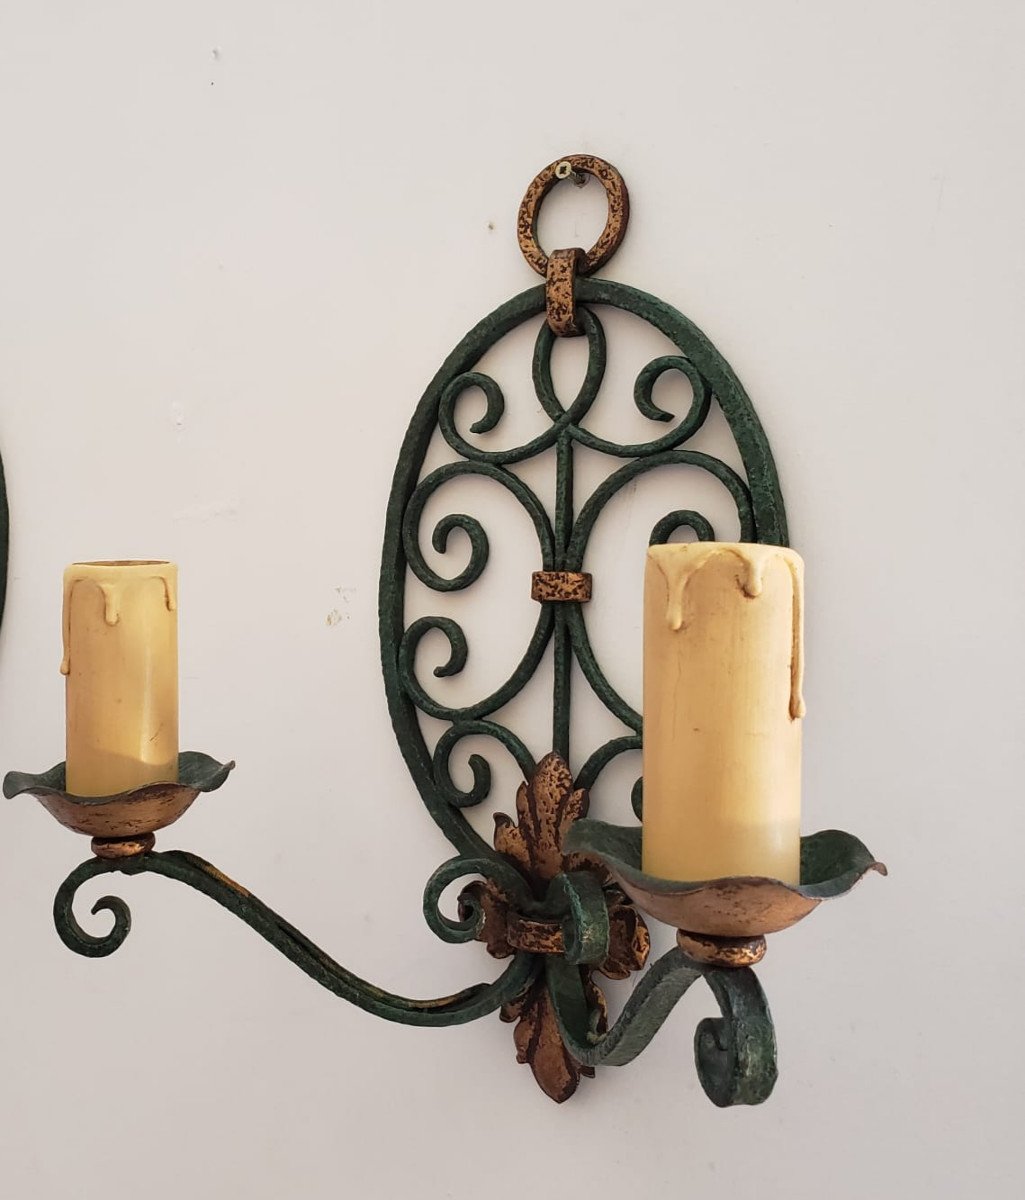 Pair Of Wrought Iron And Bronze Sconces - Green Bronze And Gold Enamelled Patina - Period 1940/50-photo-2